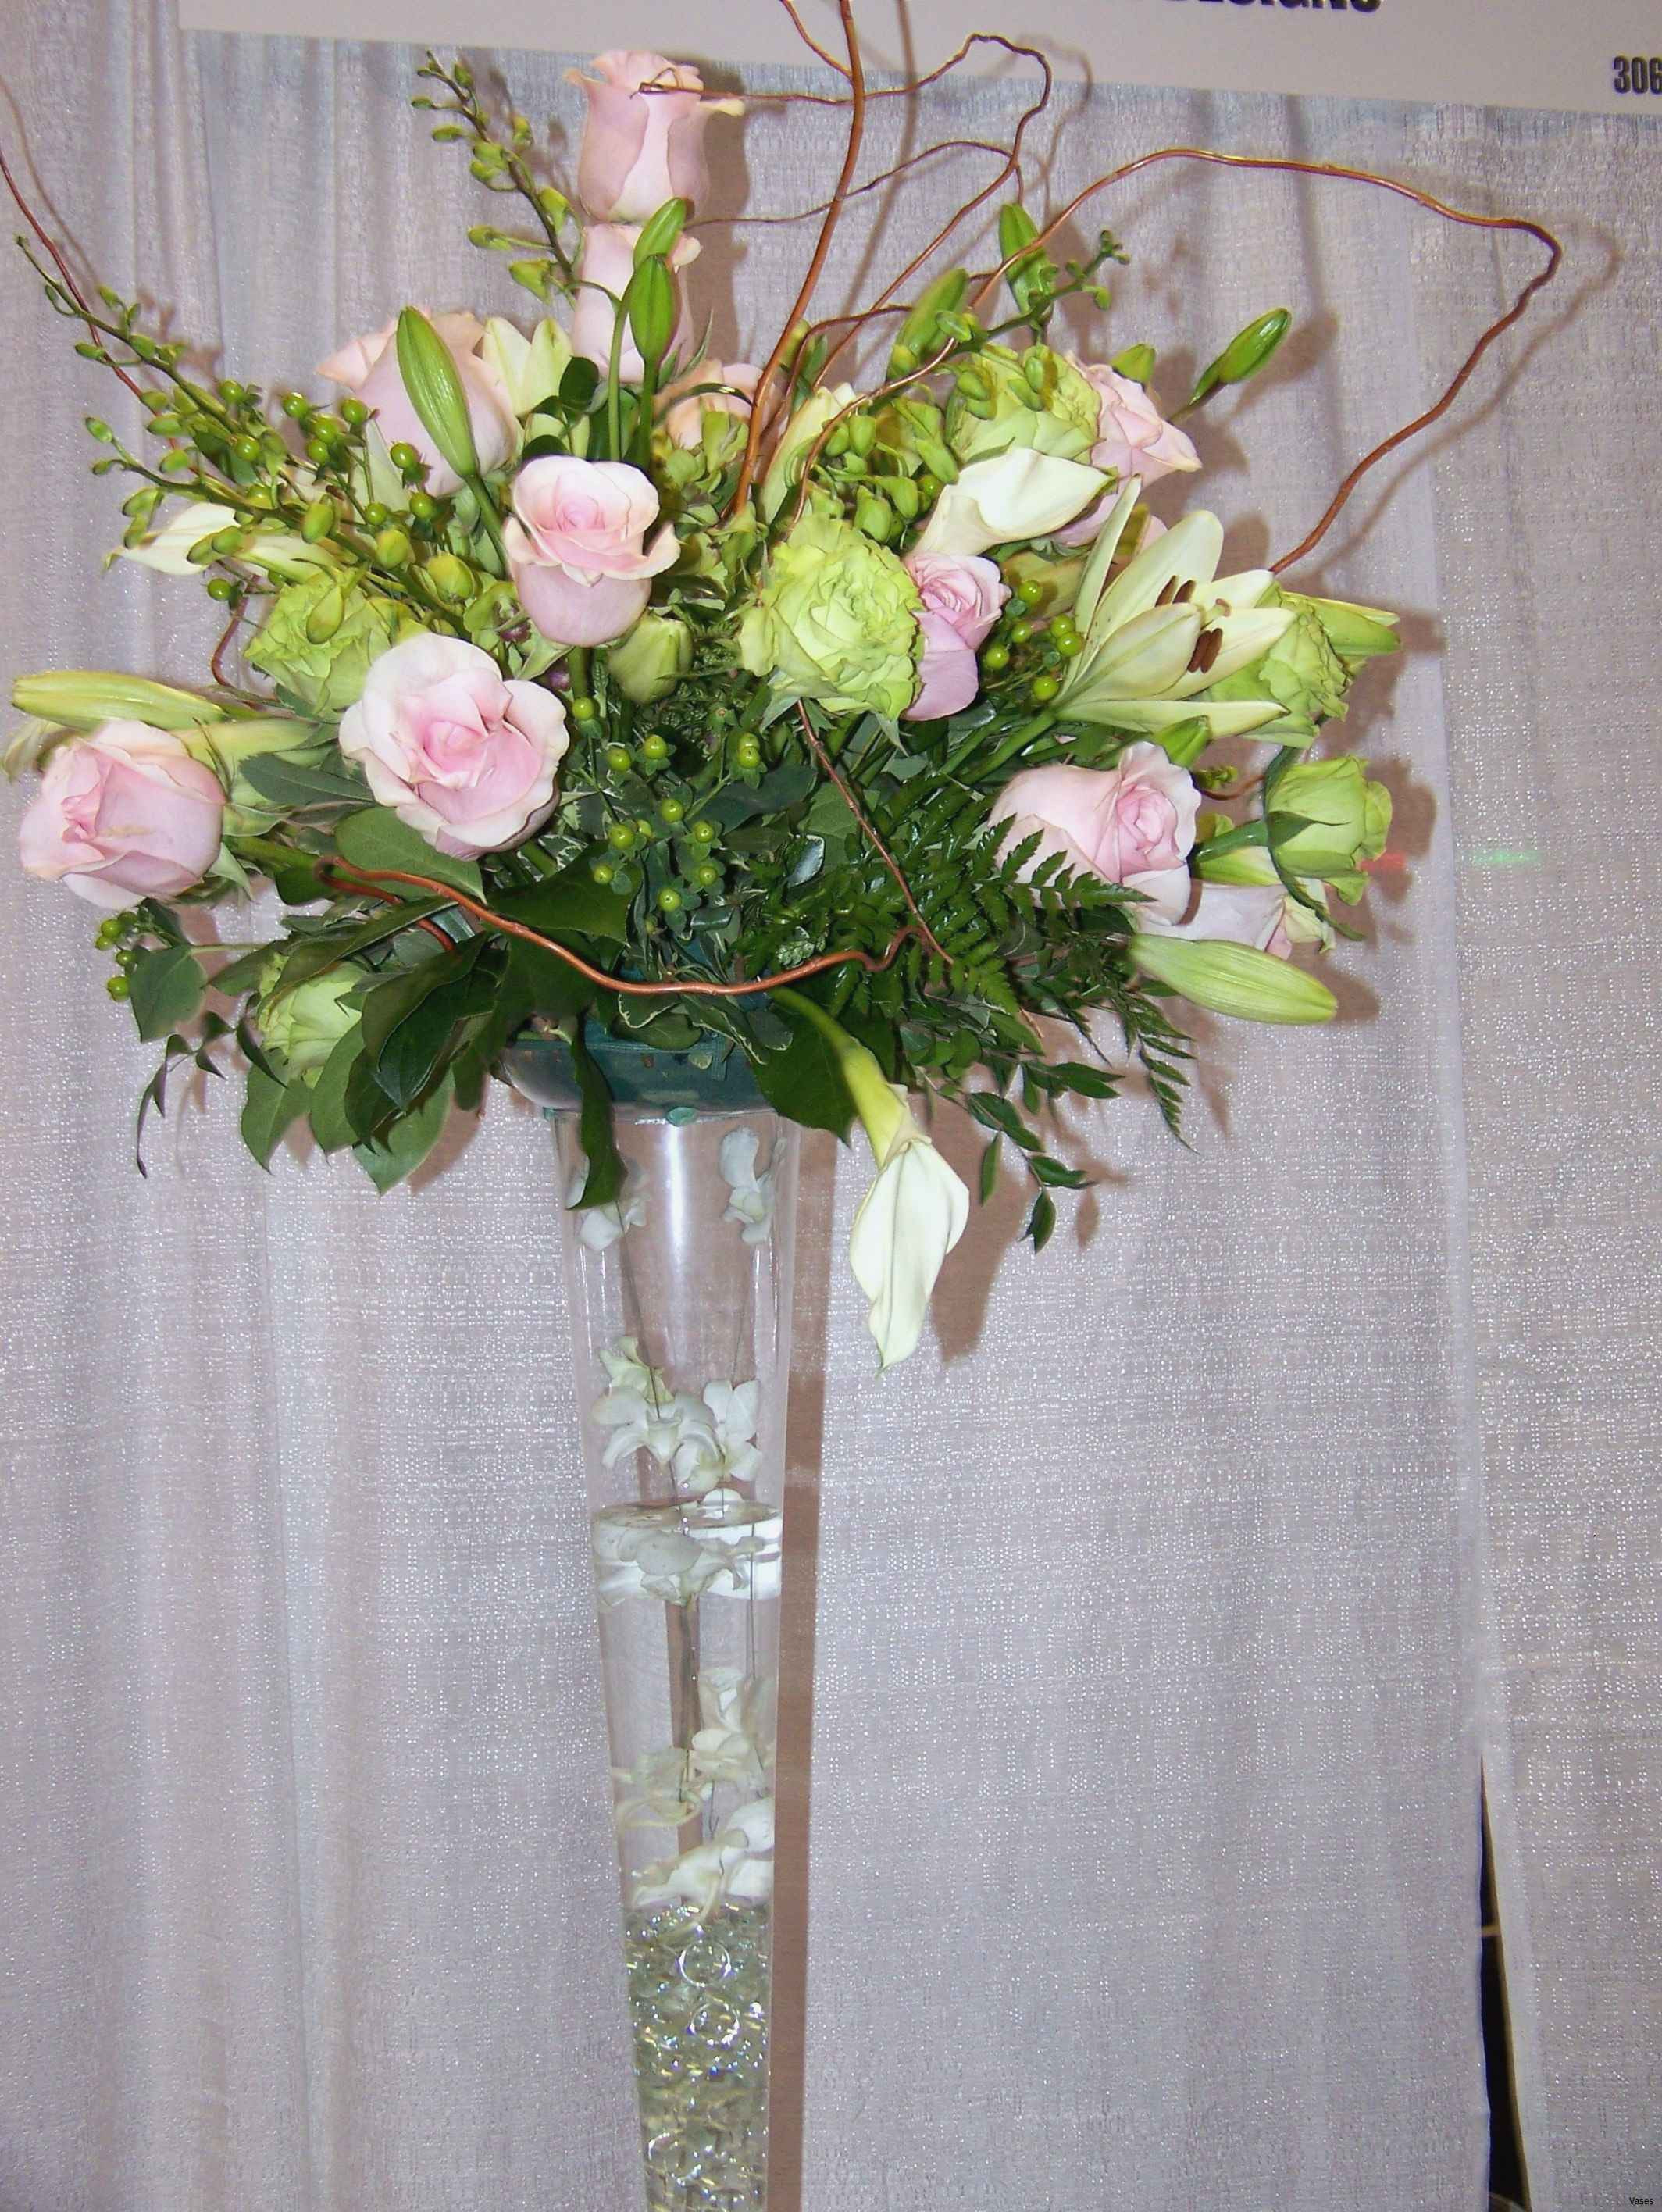 28 Unique Vase with Lilies 2024 free download vase with lilies of elegant fall wedding bouquet wedding theme inside h vases ideas for floral arrangements in i 0d design ideas design inspiration rustic fall